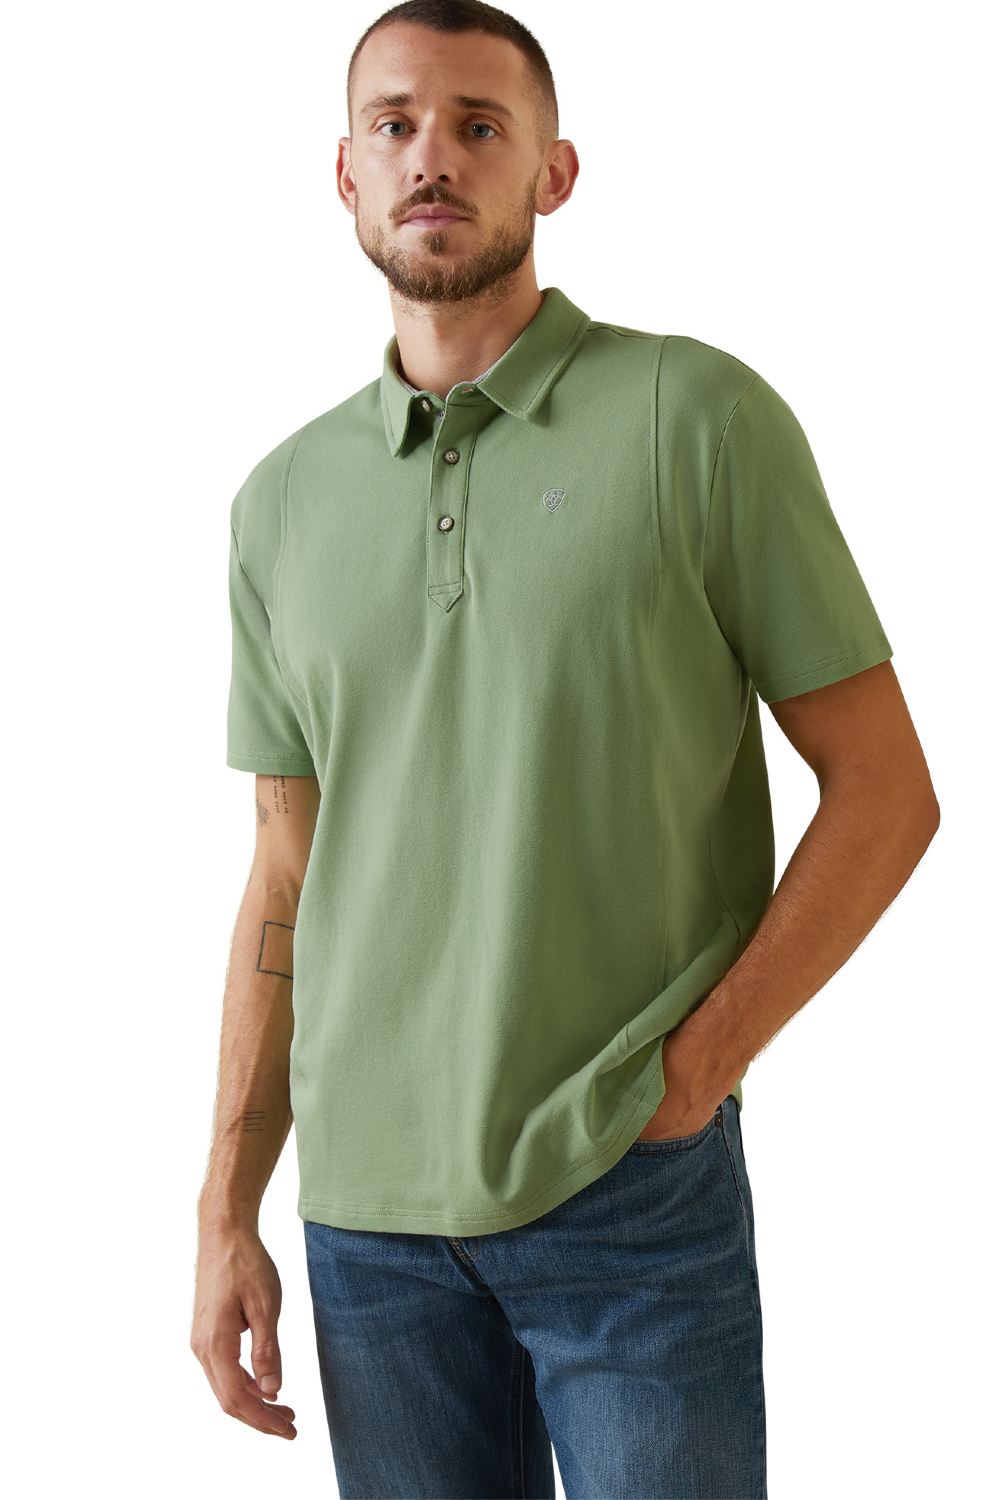 Ariat Medal Polo Shirt In Basil - Close up front  